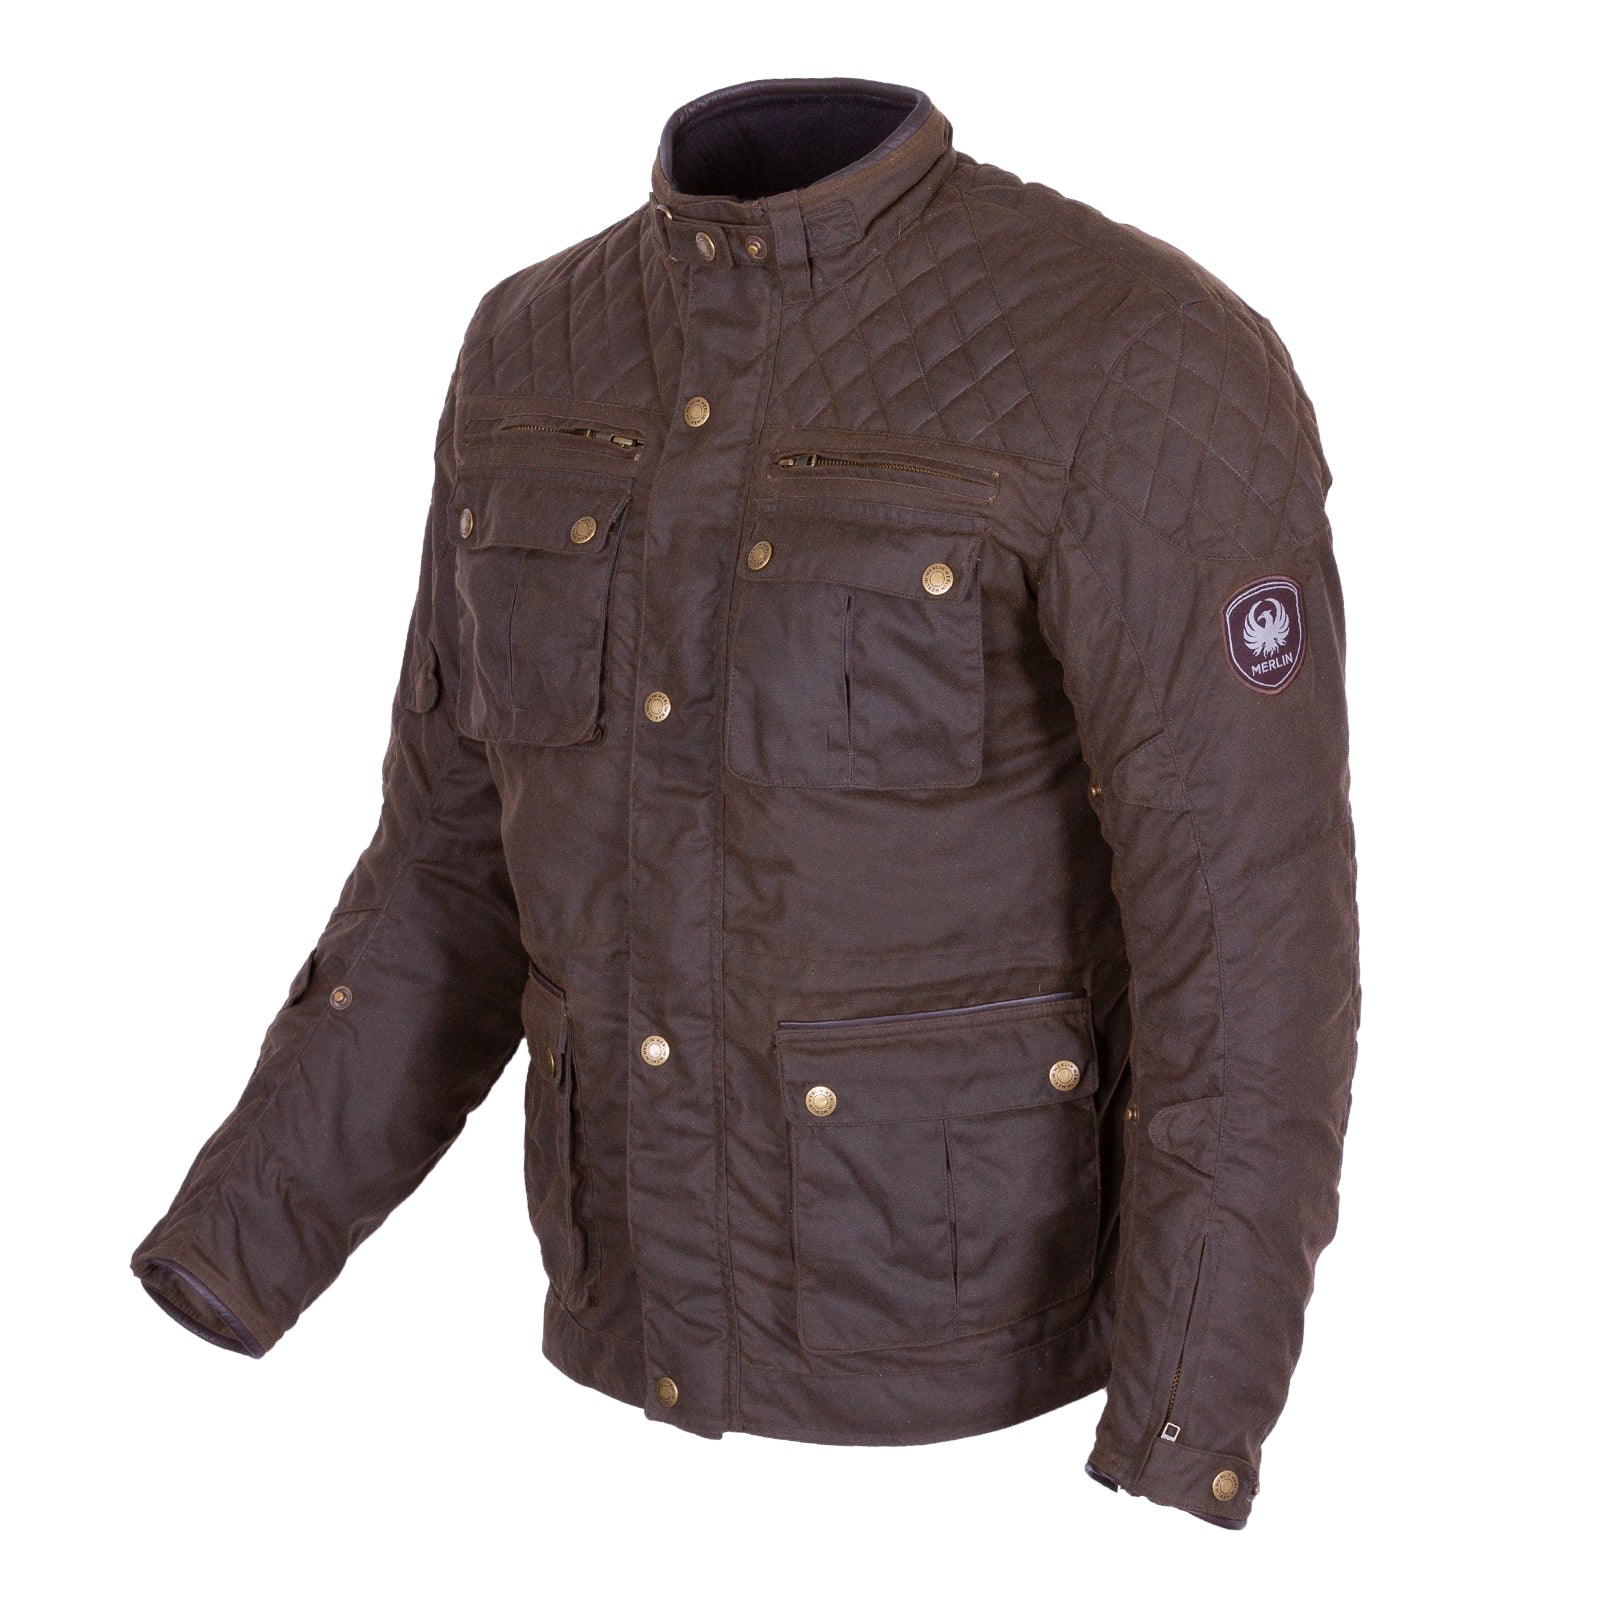 Merlin Motorcycle Jackets | Shop Classic Motorcycle Clothing and ...